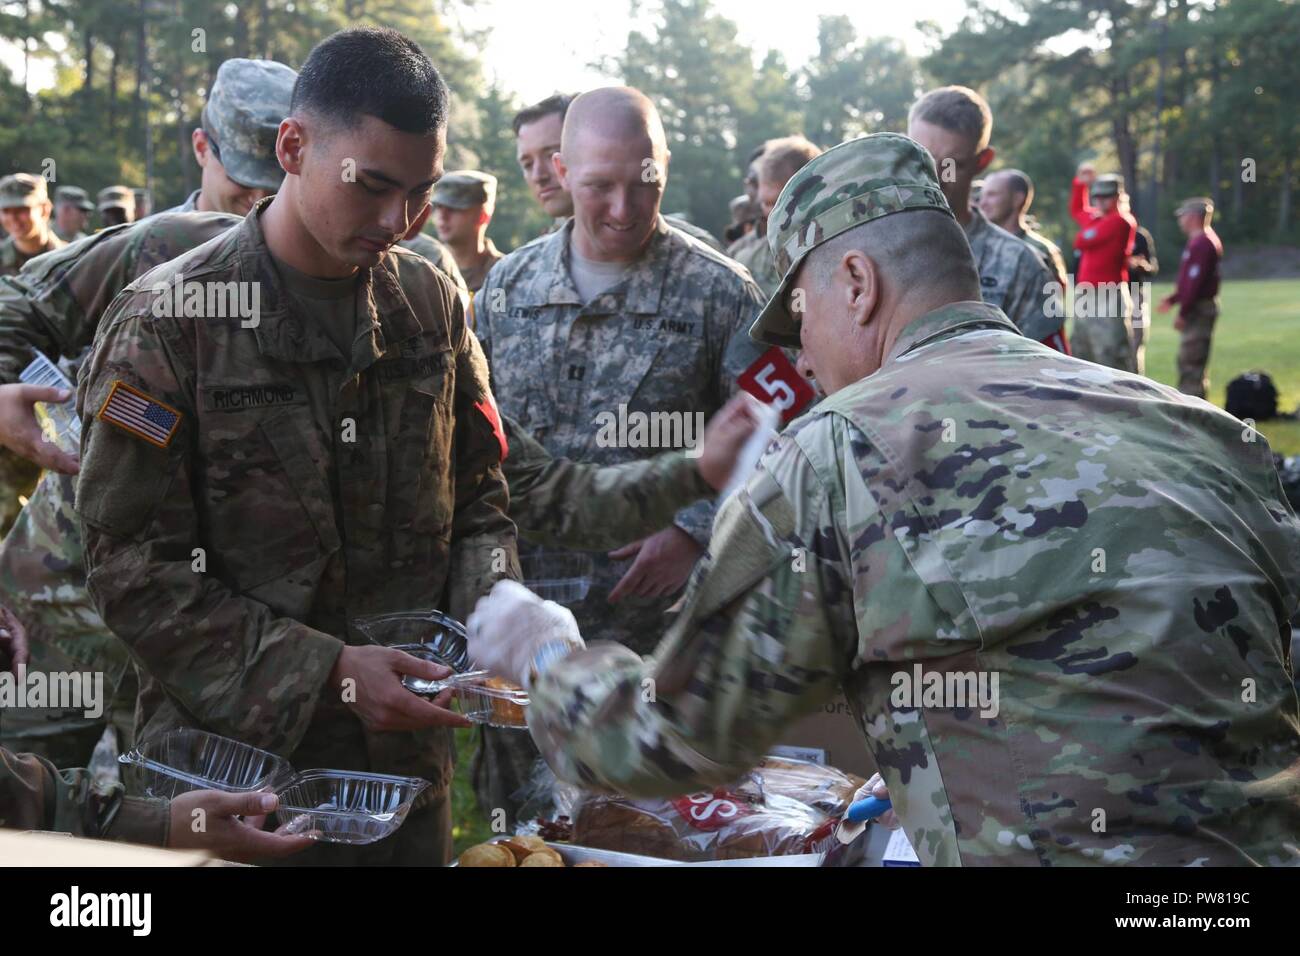 U.S. Army Sgt. Kevin Richmond, assigned to Martin Army Community Hospital, gets served a hot breakfast after the 2017 Best Medic Competition at Fort Bragg, N.C., Sept. 20, 2017. The competition tested the physical and mental toughness, as well as the technical competence, of each medic to identify the team moving forward to represent the region at the next level of the competition. Stock Photo